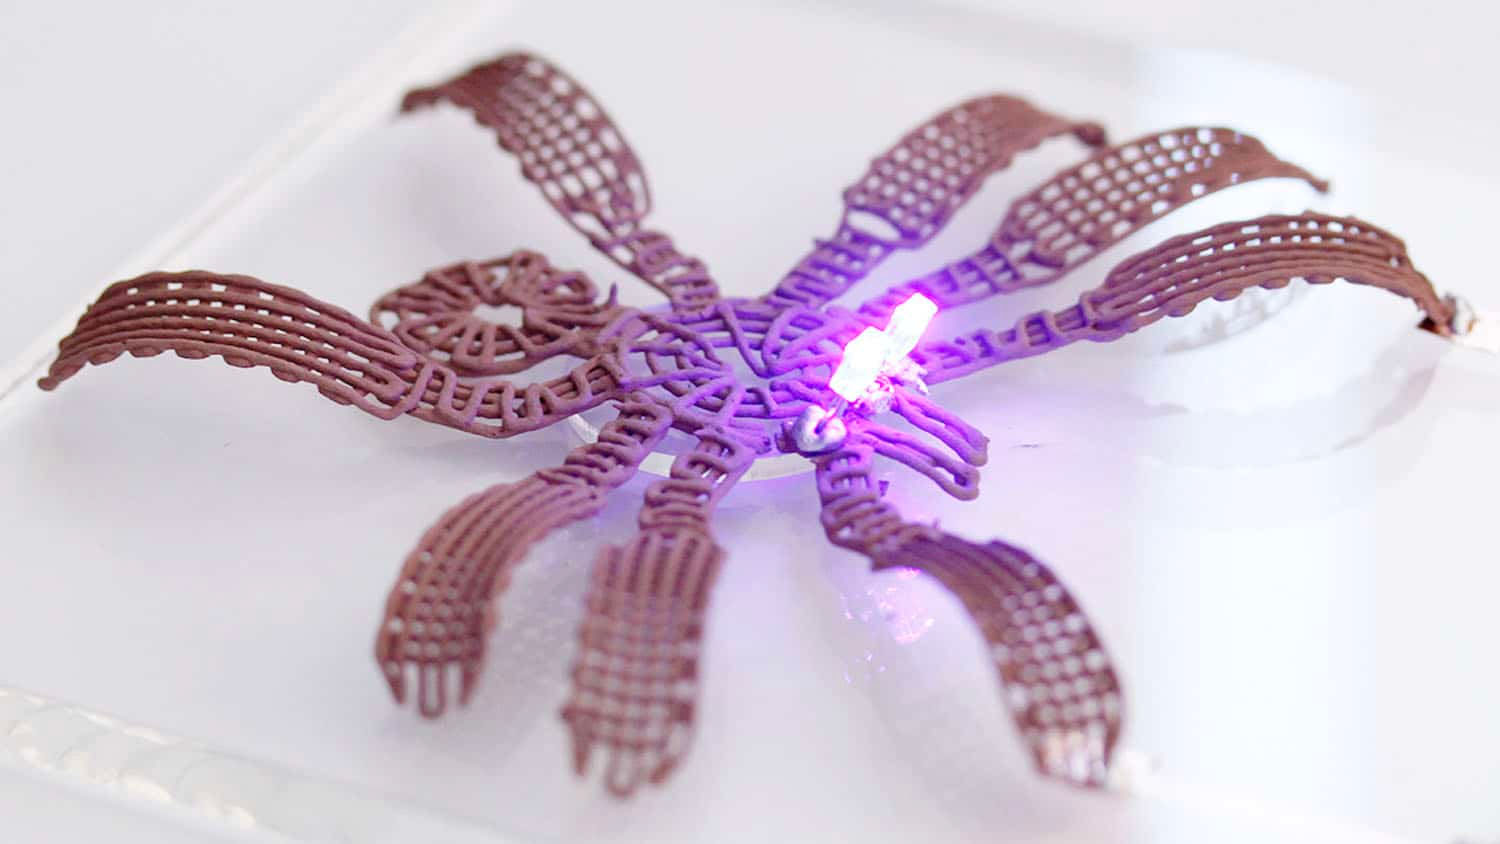 This image shows a metallic spider that was printed at room temperature using the metallic gel, and which assembled and solidified into its final 3D shape via 4D printing